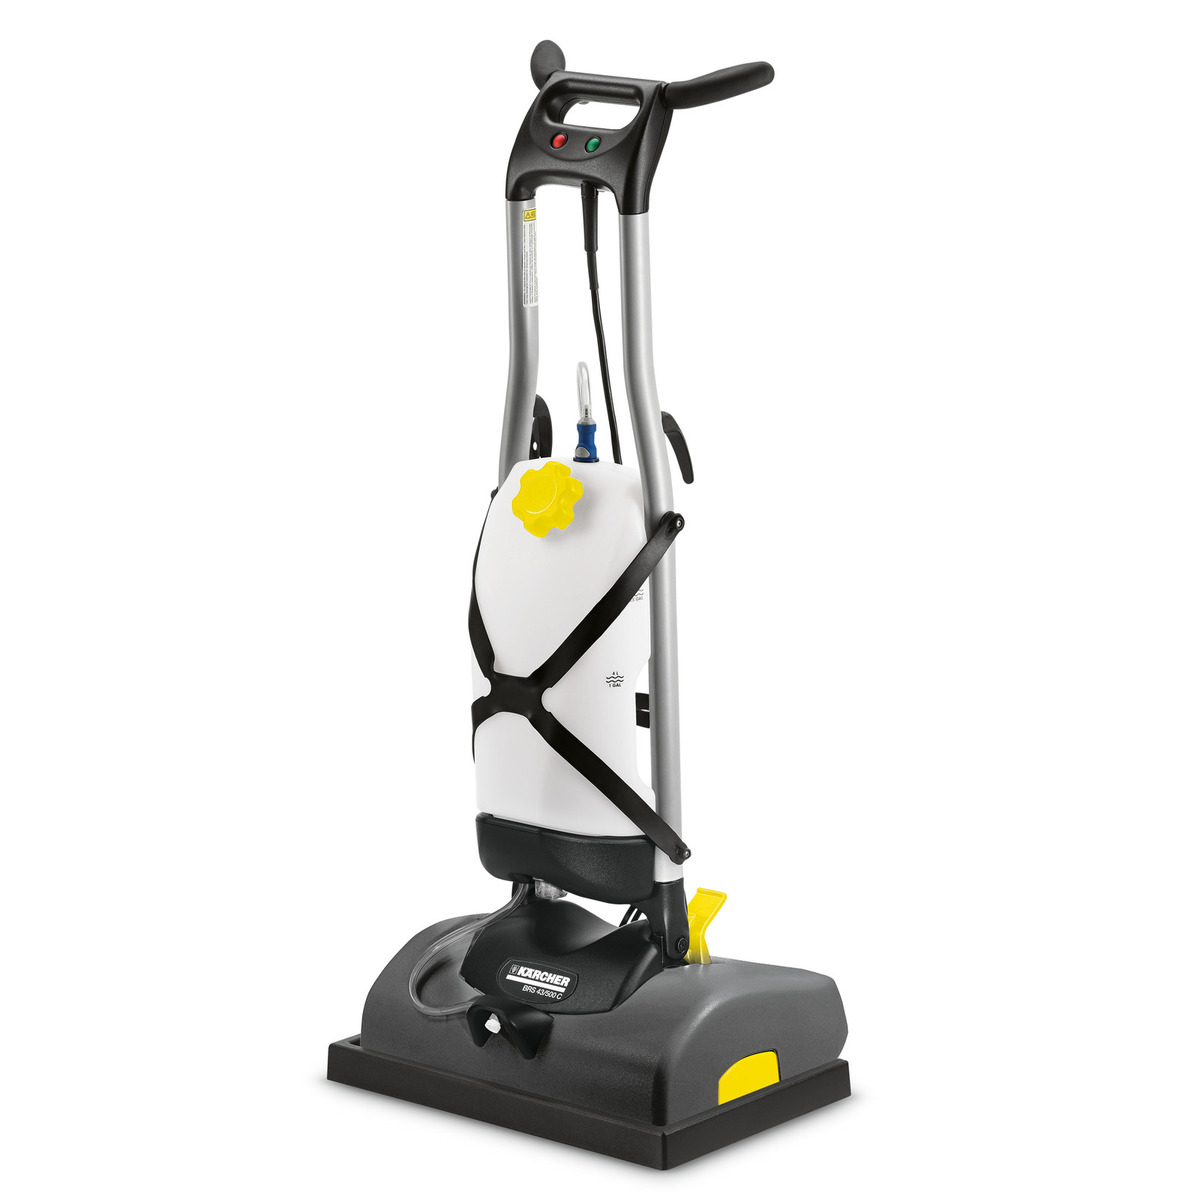 *DEMO* Karcher iCapsol BRS 43/500 C Deluxe karcher, icapsol, BRS, 43/500, deluxe, carpet, cleaning, commercial, compact, machine, cleaner, rug, shampooer, shampoo, extraction, 